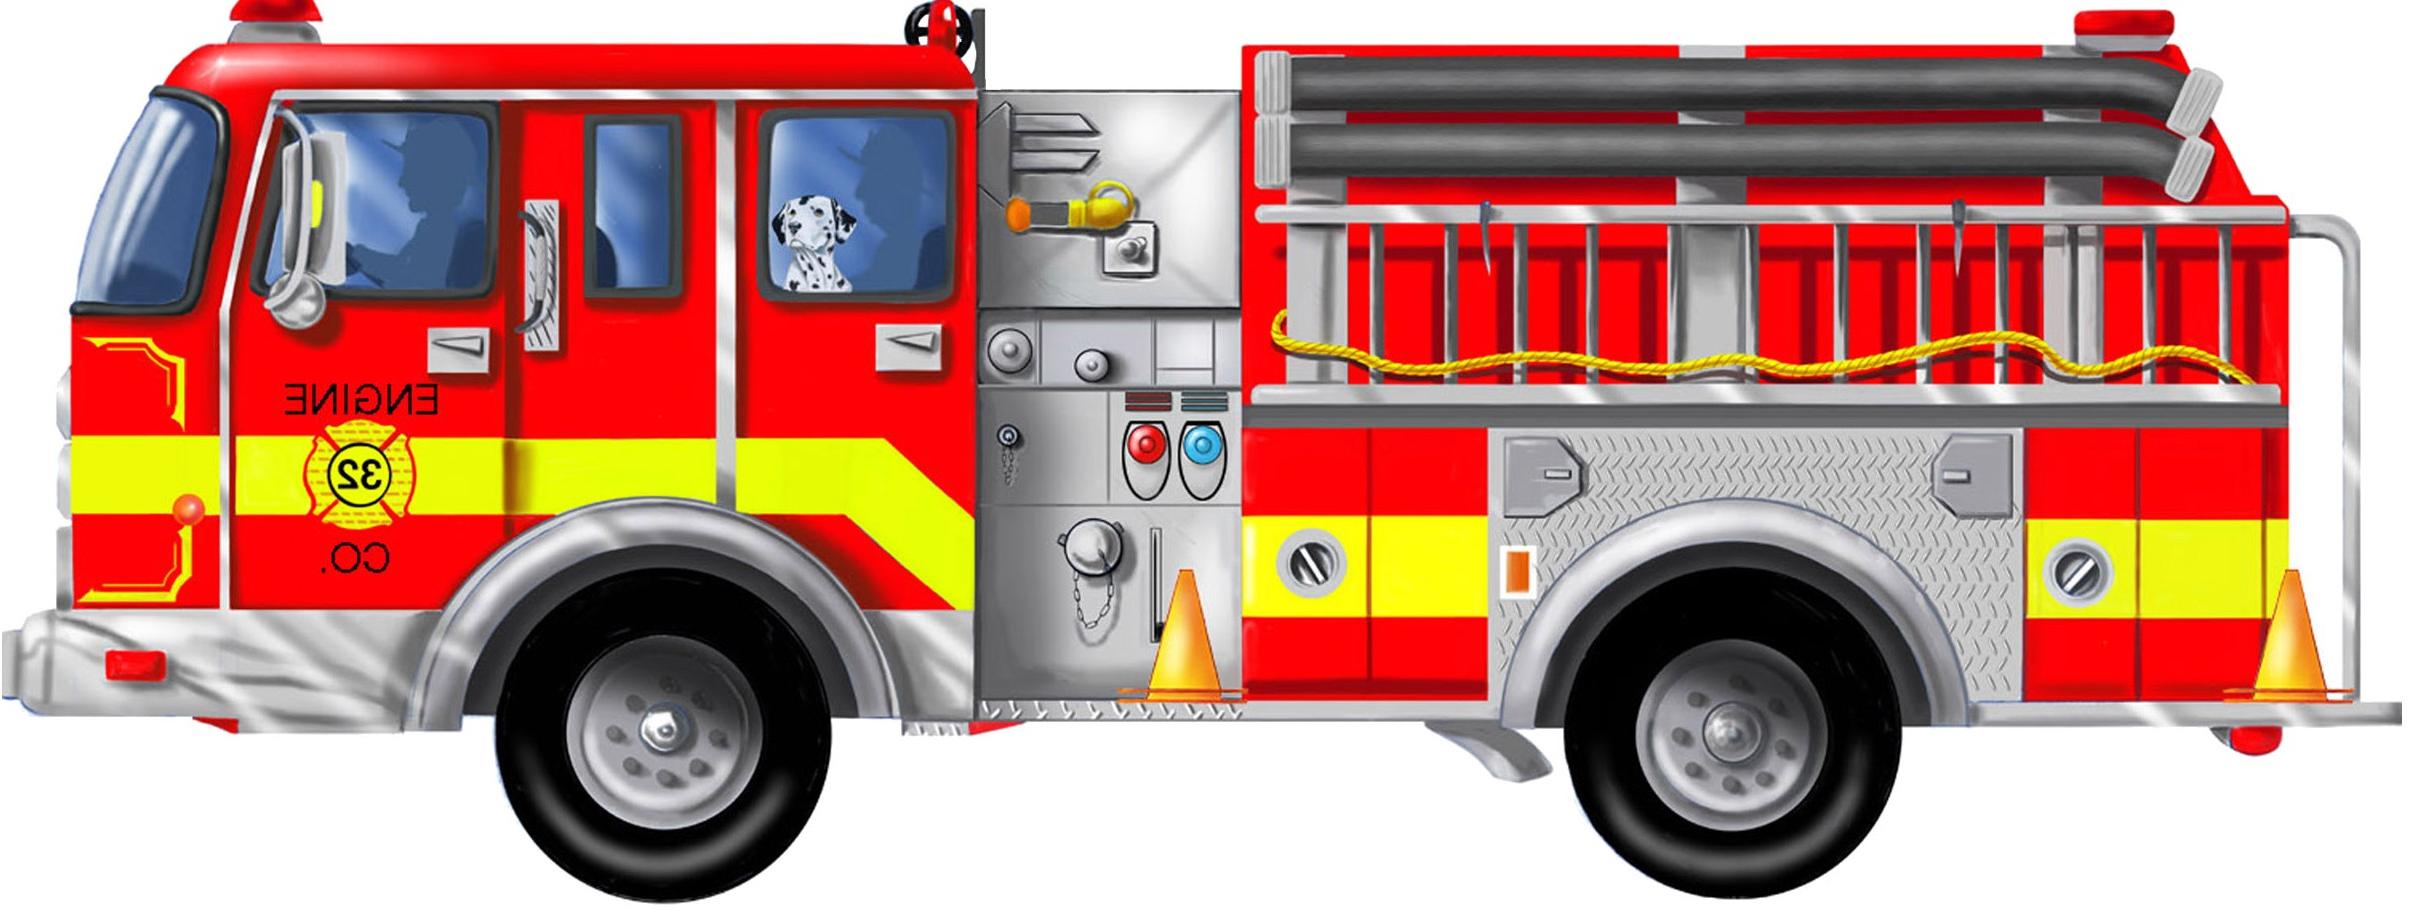 Fire Truck Clipart this image